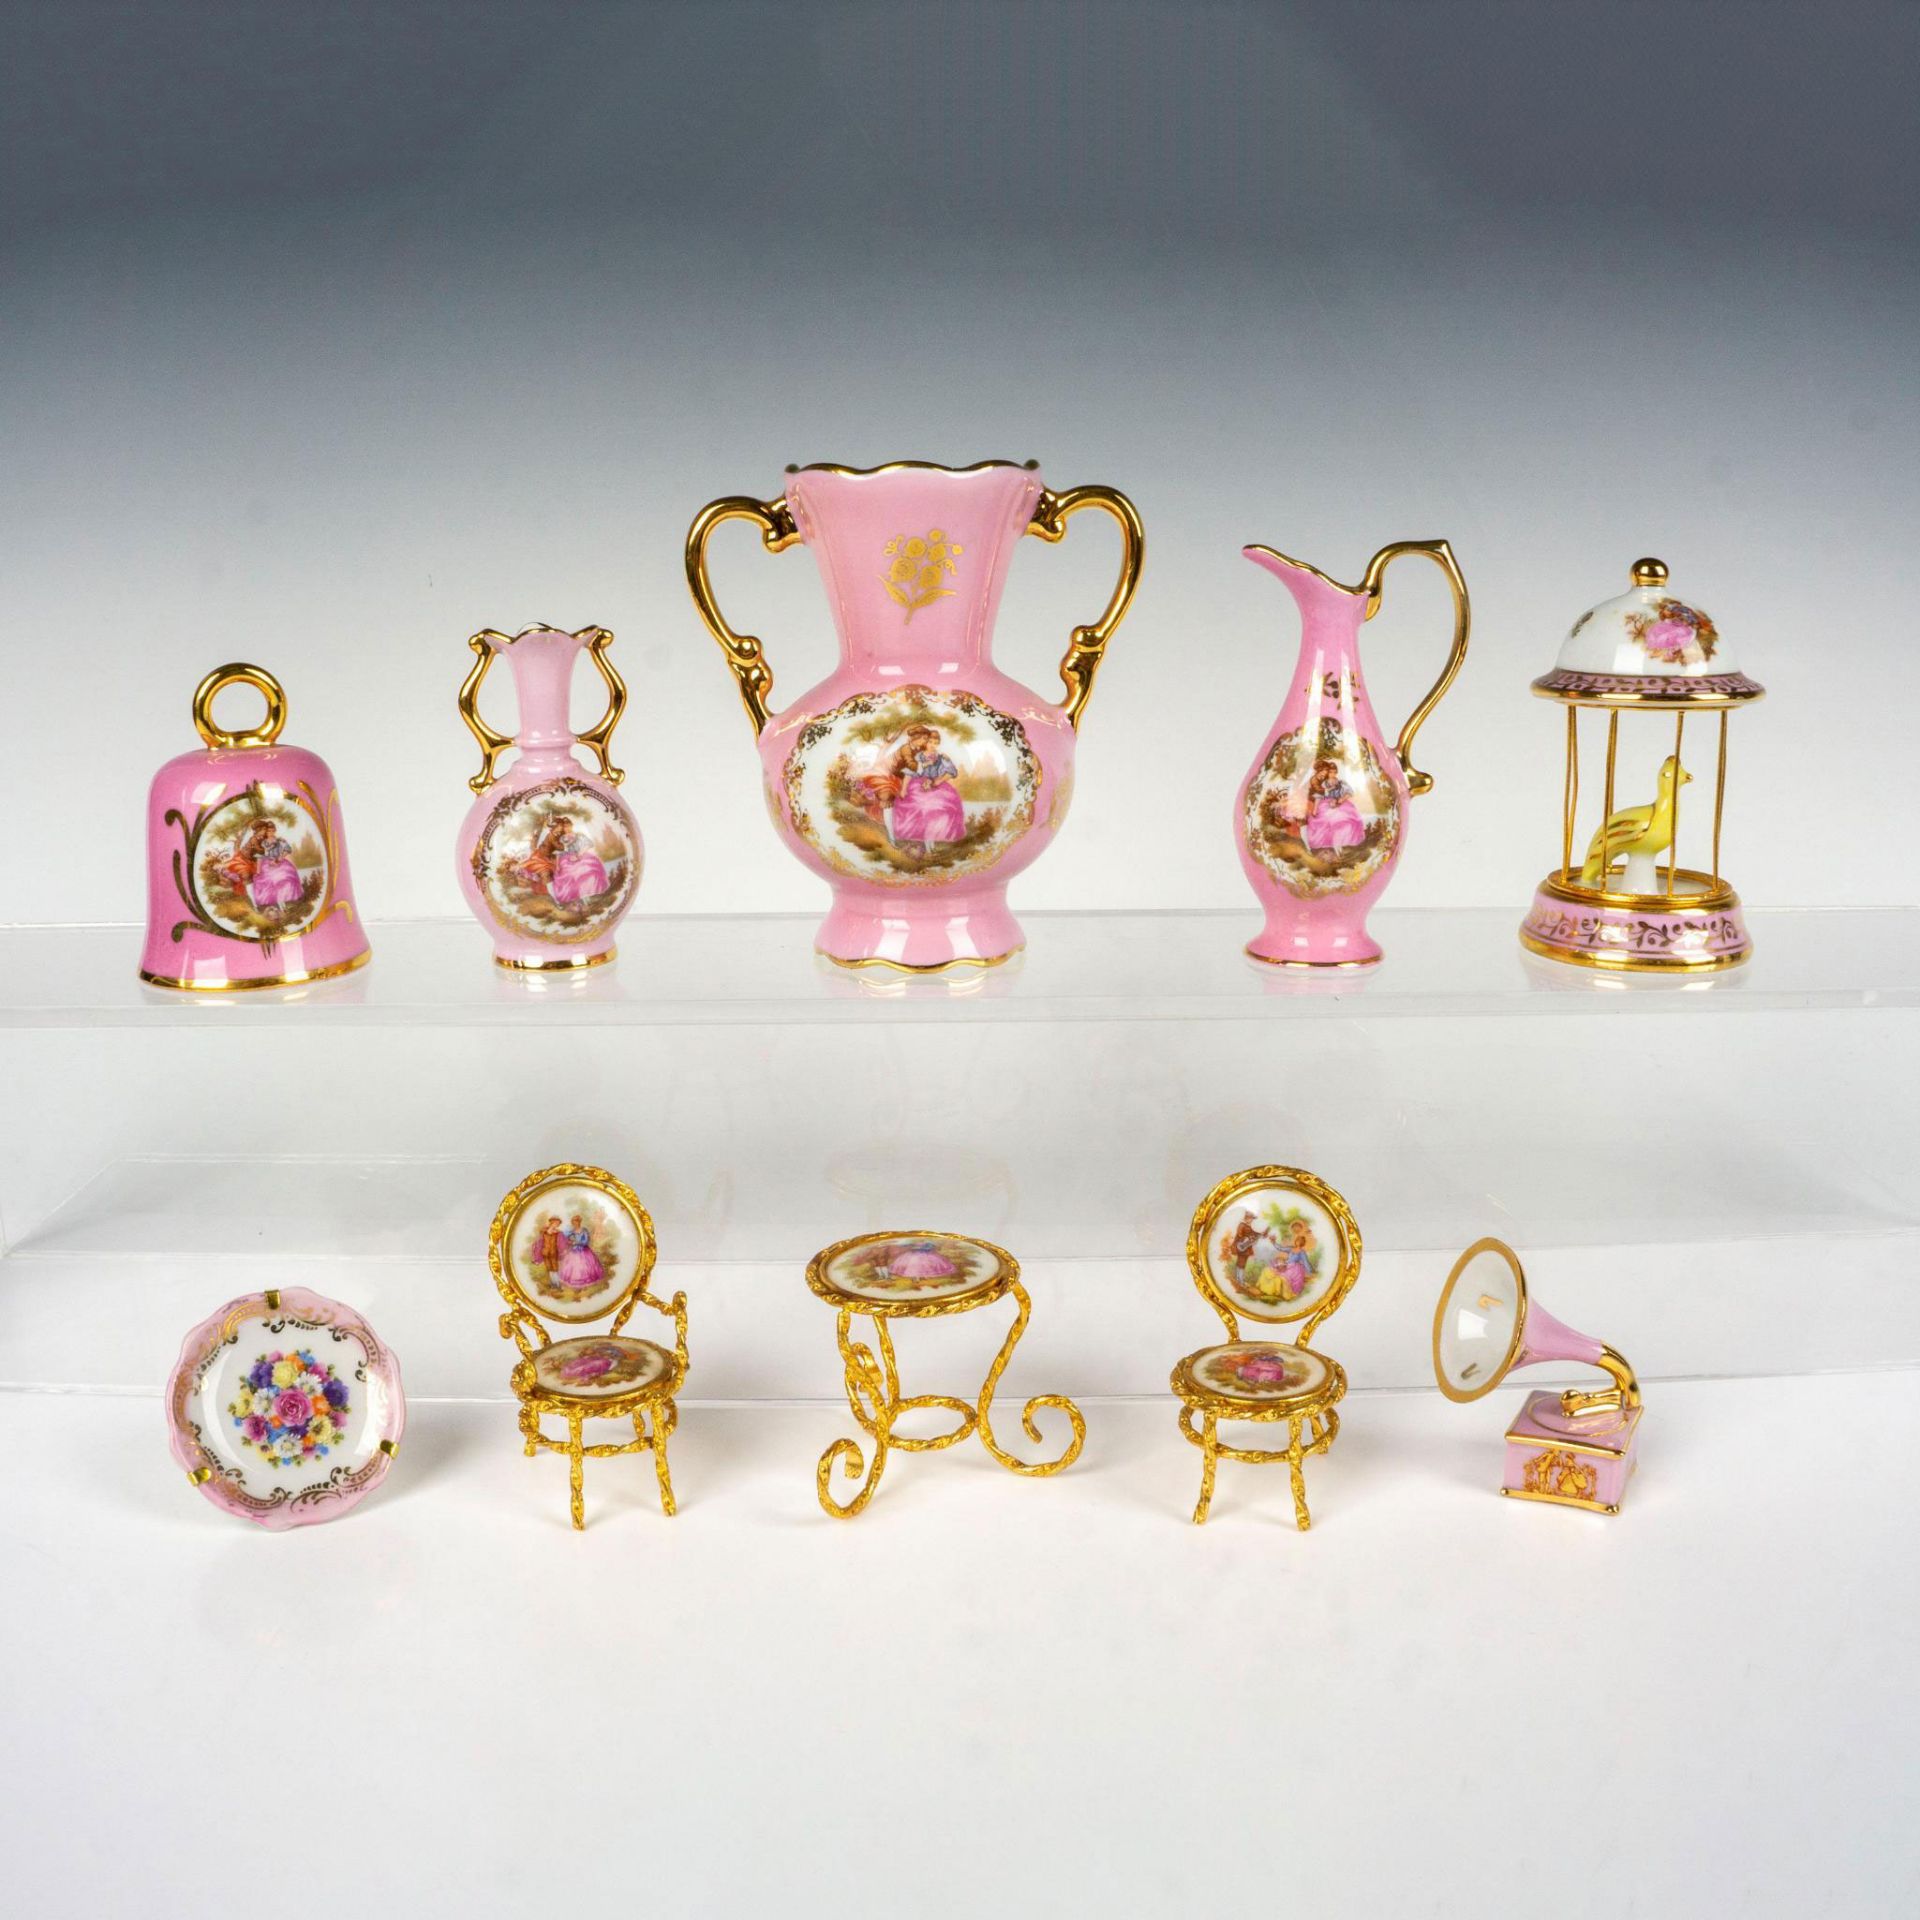 10pc Limoges Doll House Collectibles